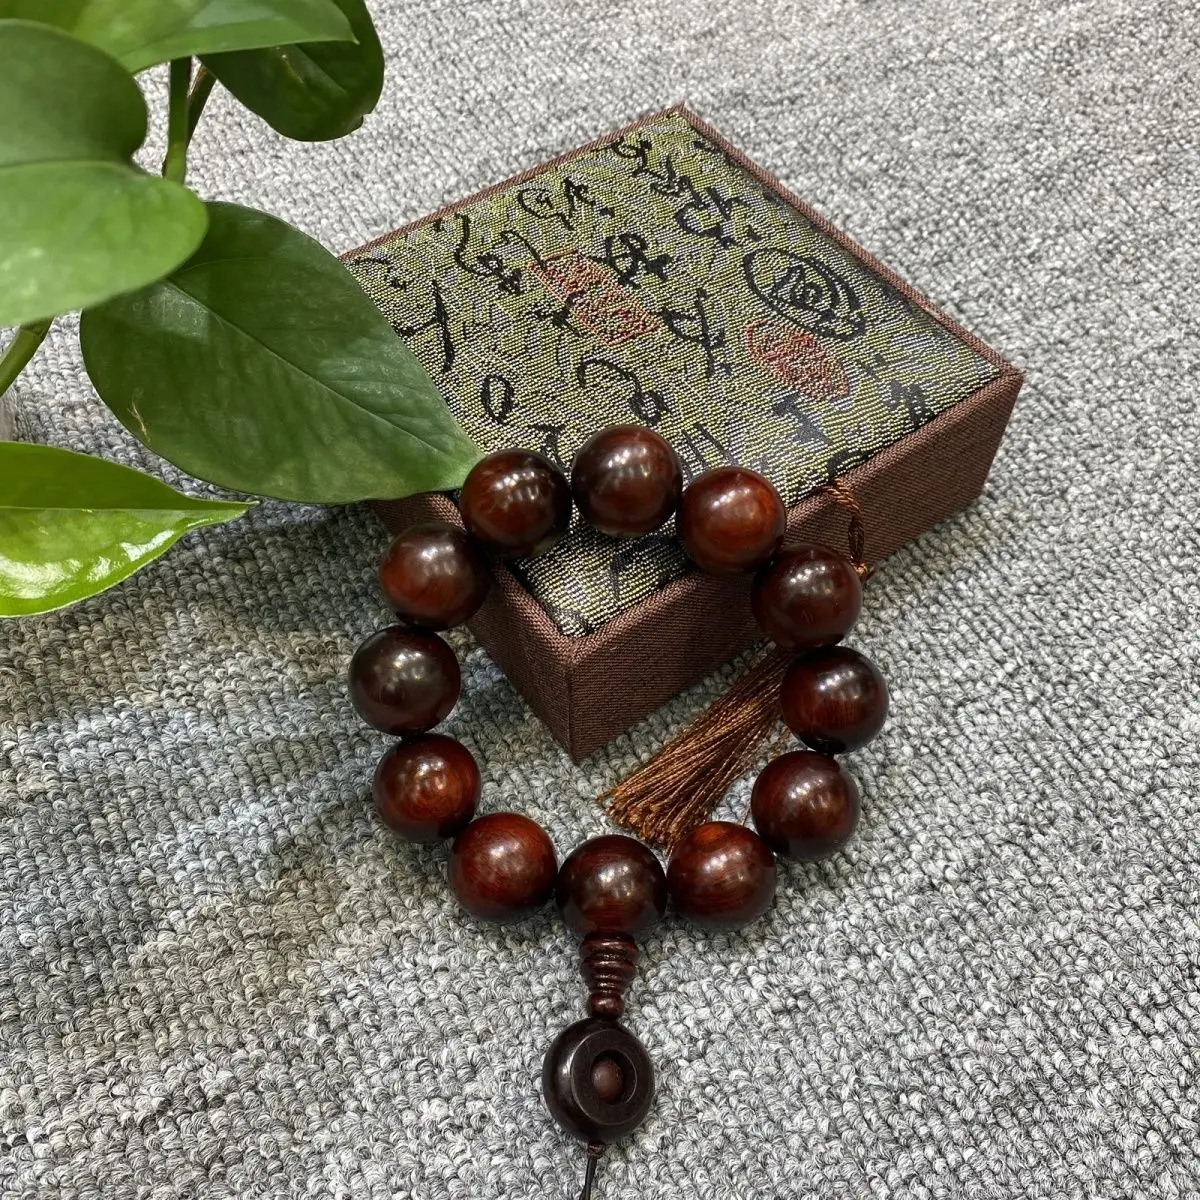 

SNQP Authentic Indian Small Leaf Red Sandalwood Handstring 2.0 Vintage Wooden Buddha Beads